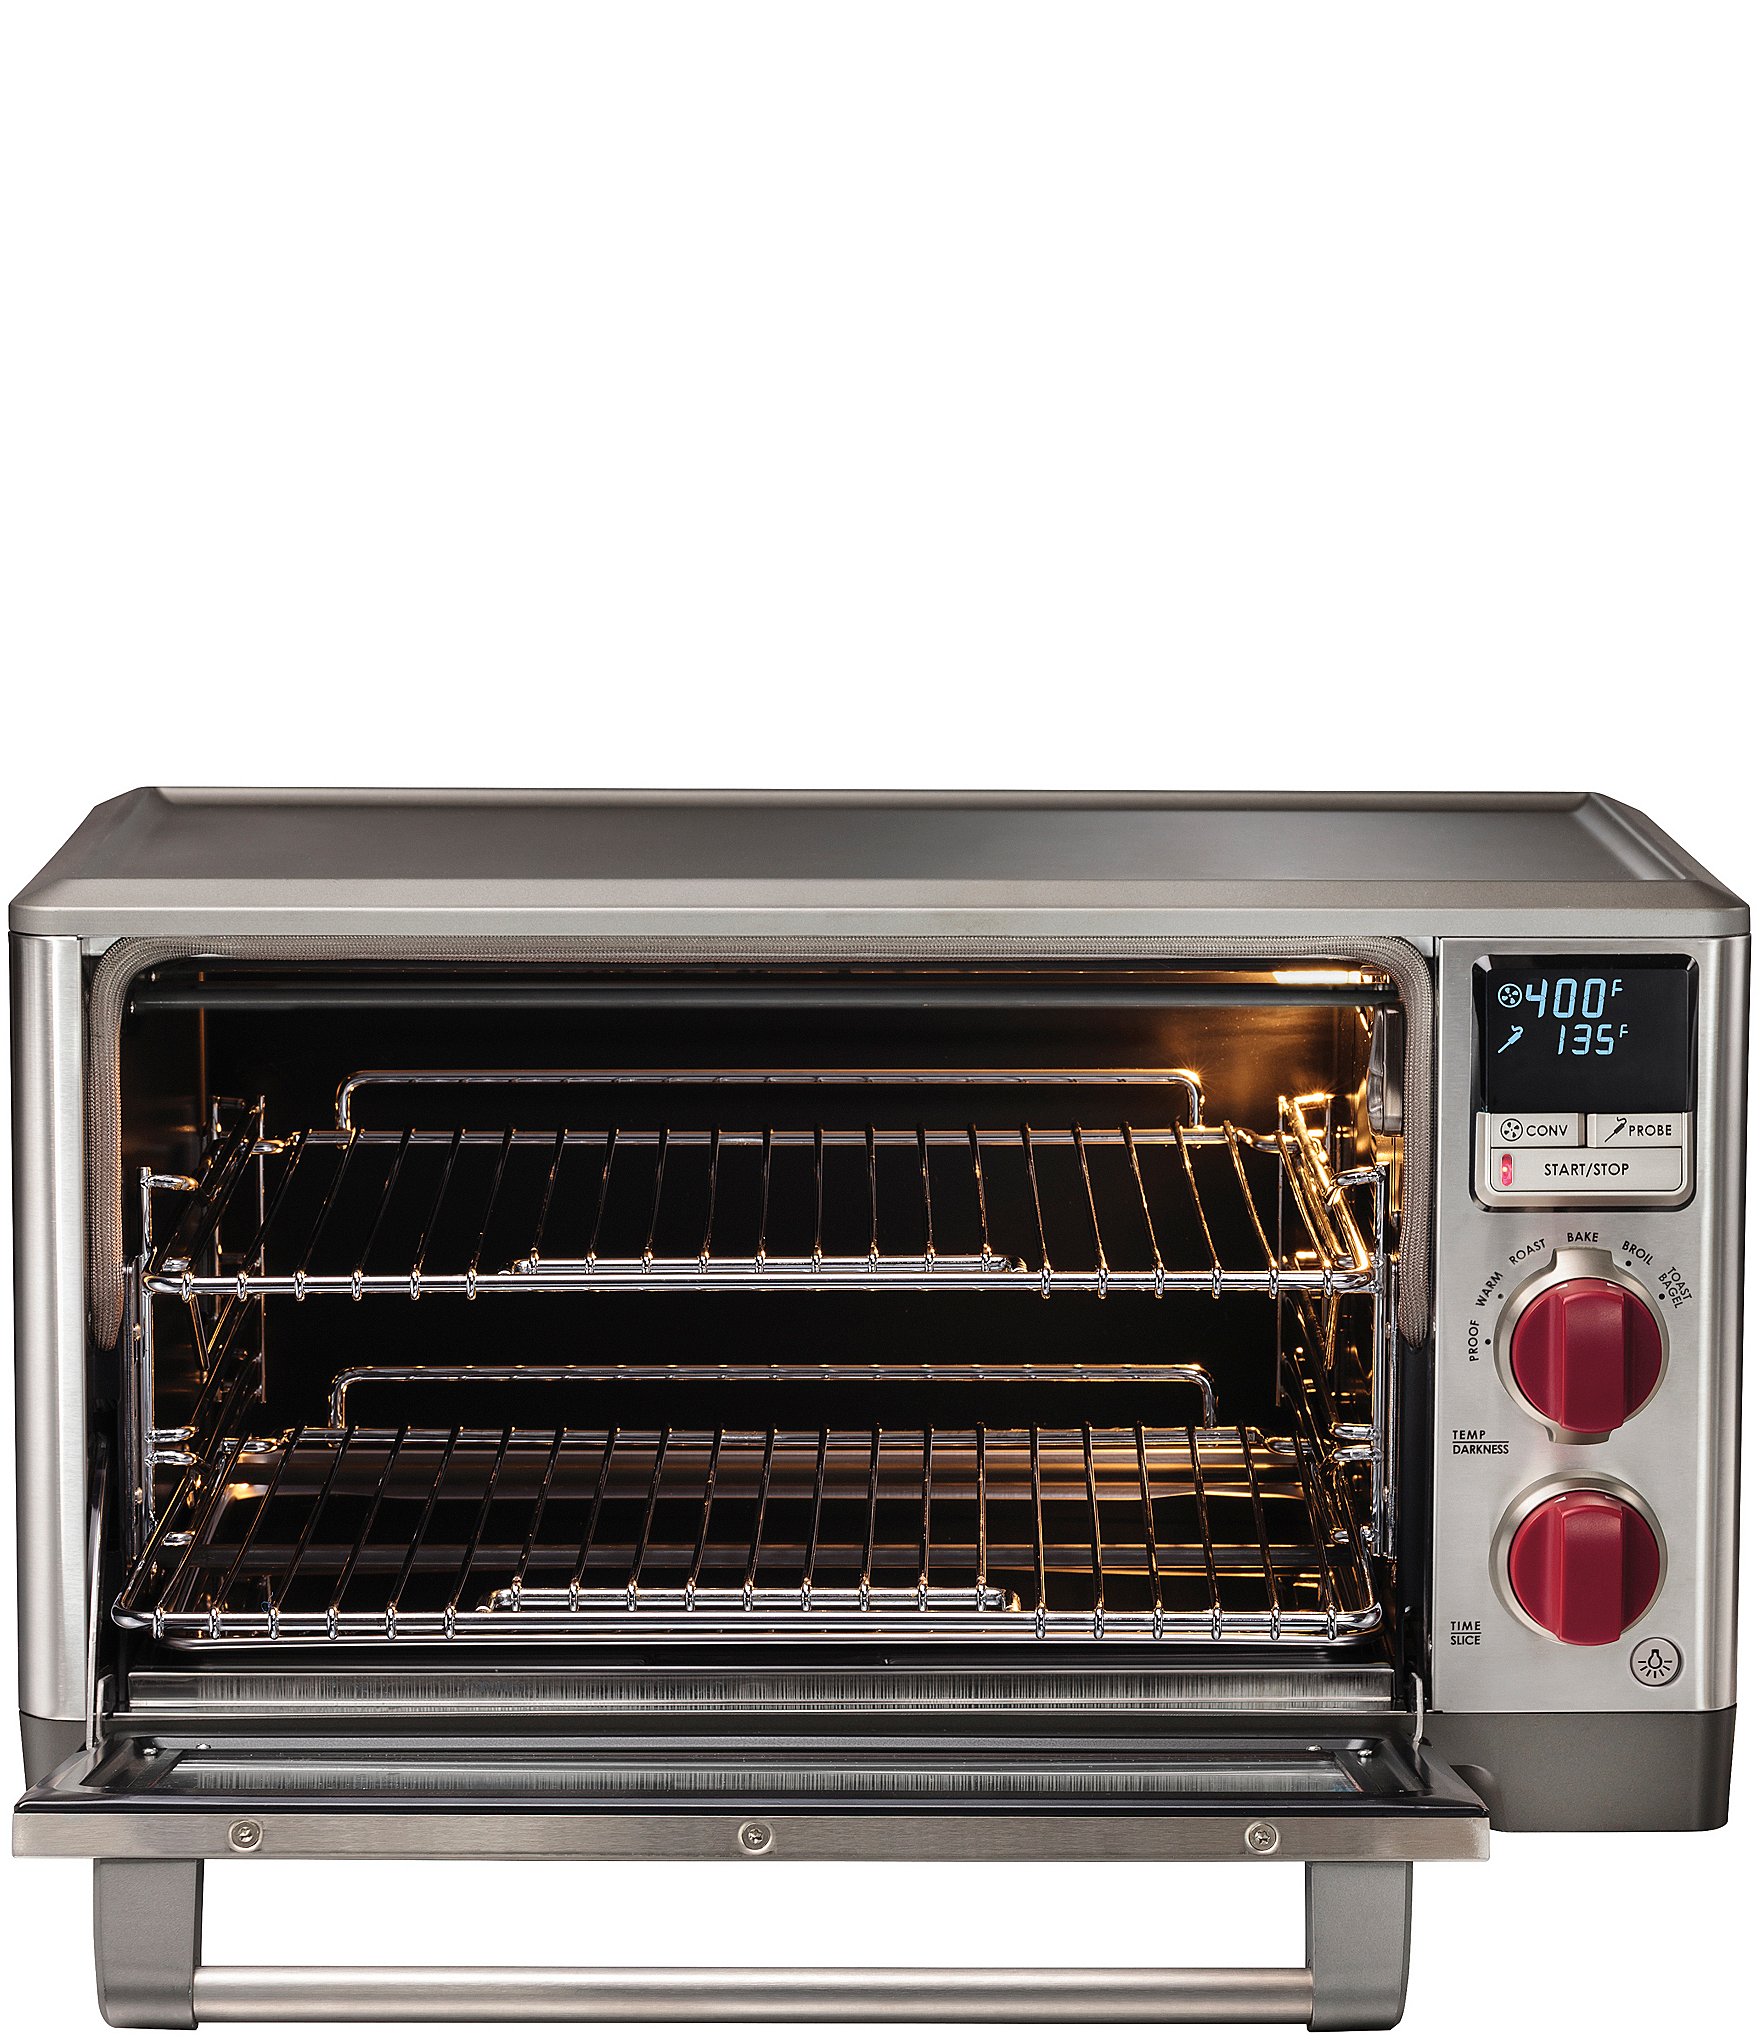 https://dimg.dillards.com/is/image/DillardsZoom/zoom/wolf-gourmet-countertop-oven-with-red-knobs/05780694_zi_stainless_steel.jpg